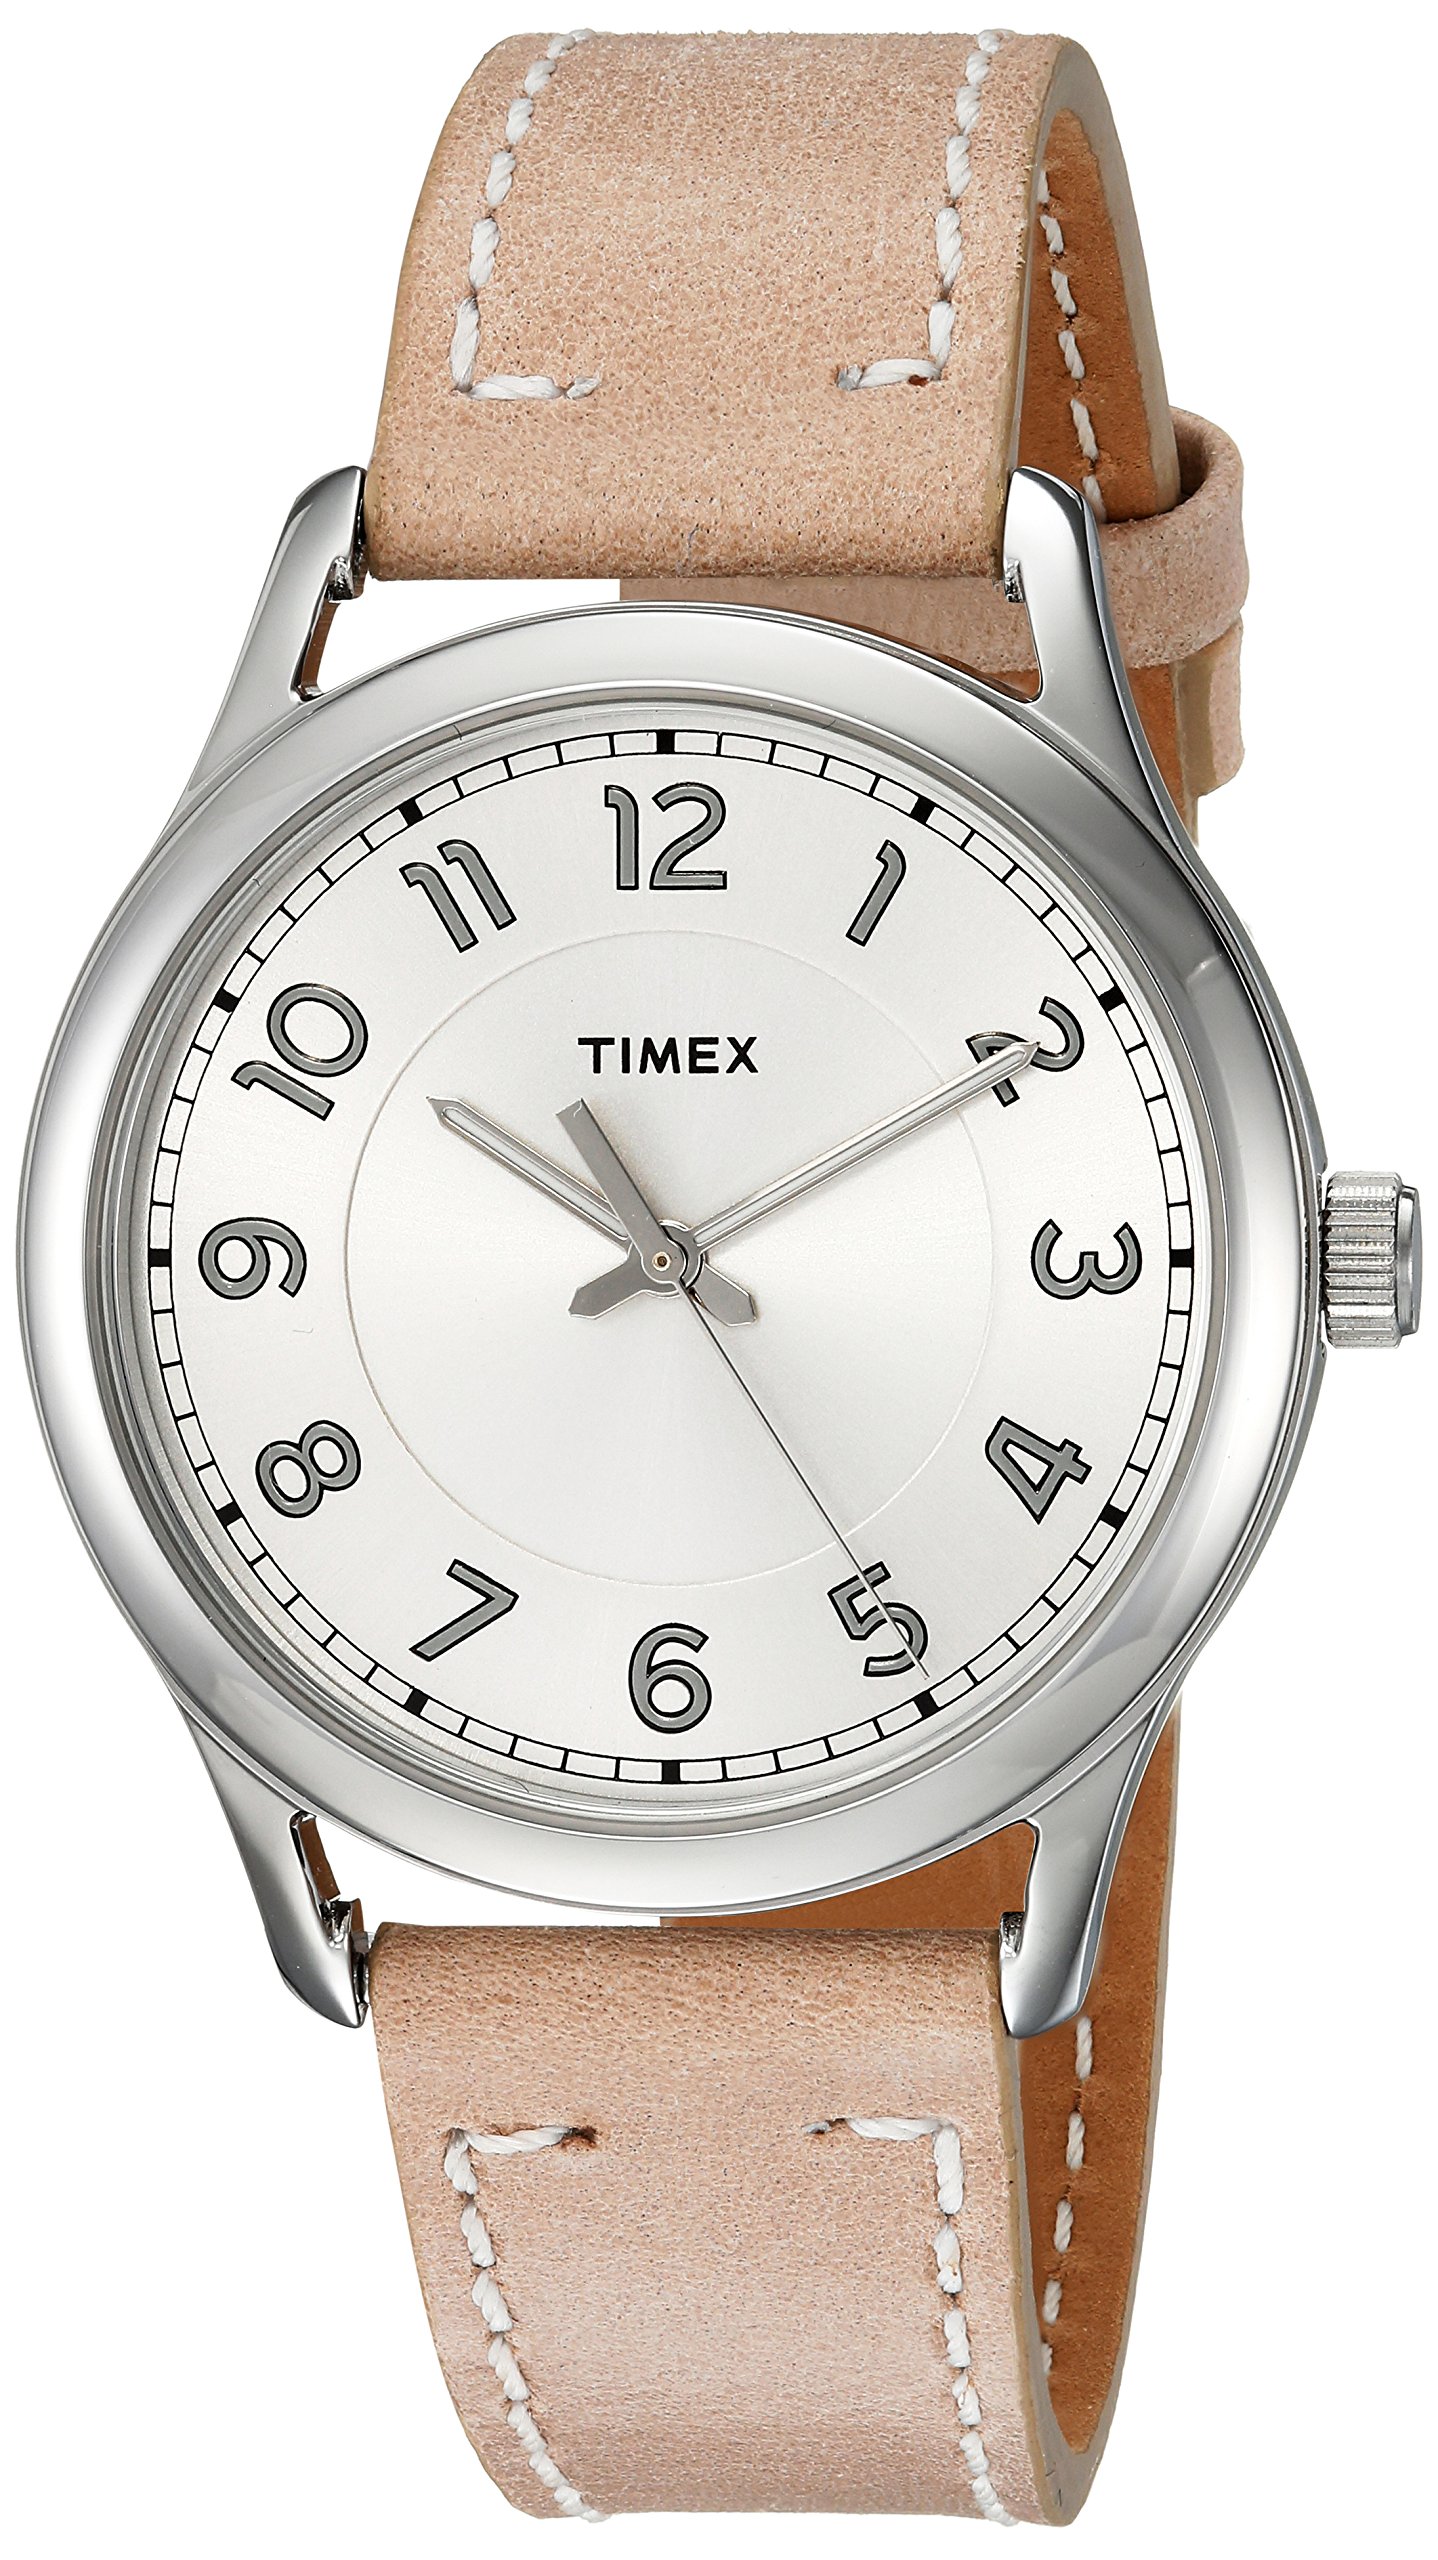 Timex Womens New England Sand/Silver Leather Strap Watch TW2R23200